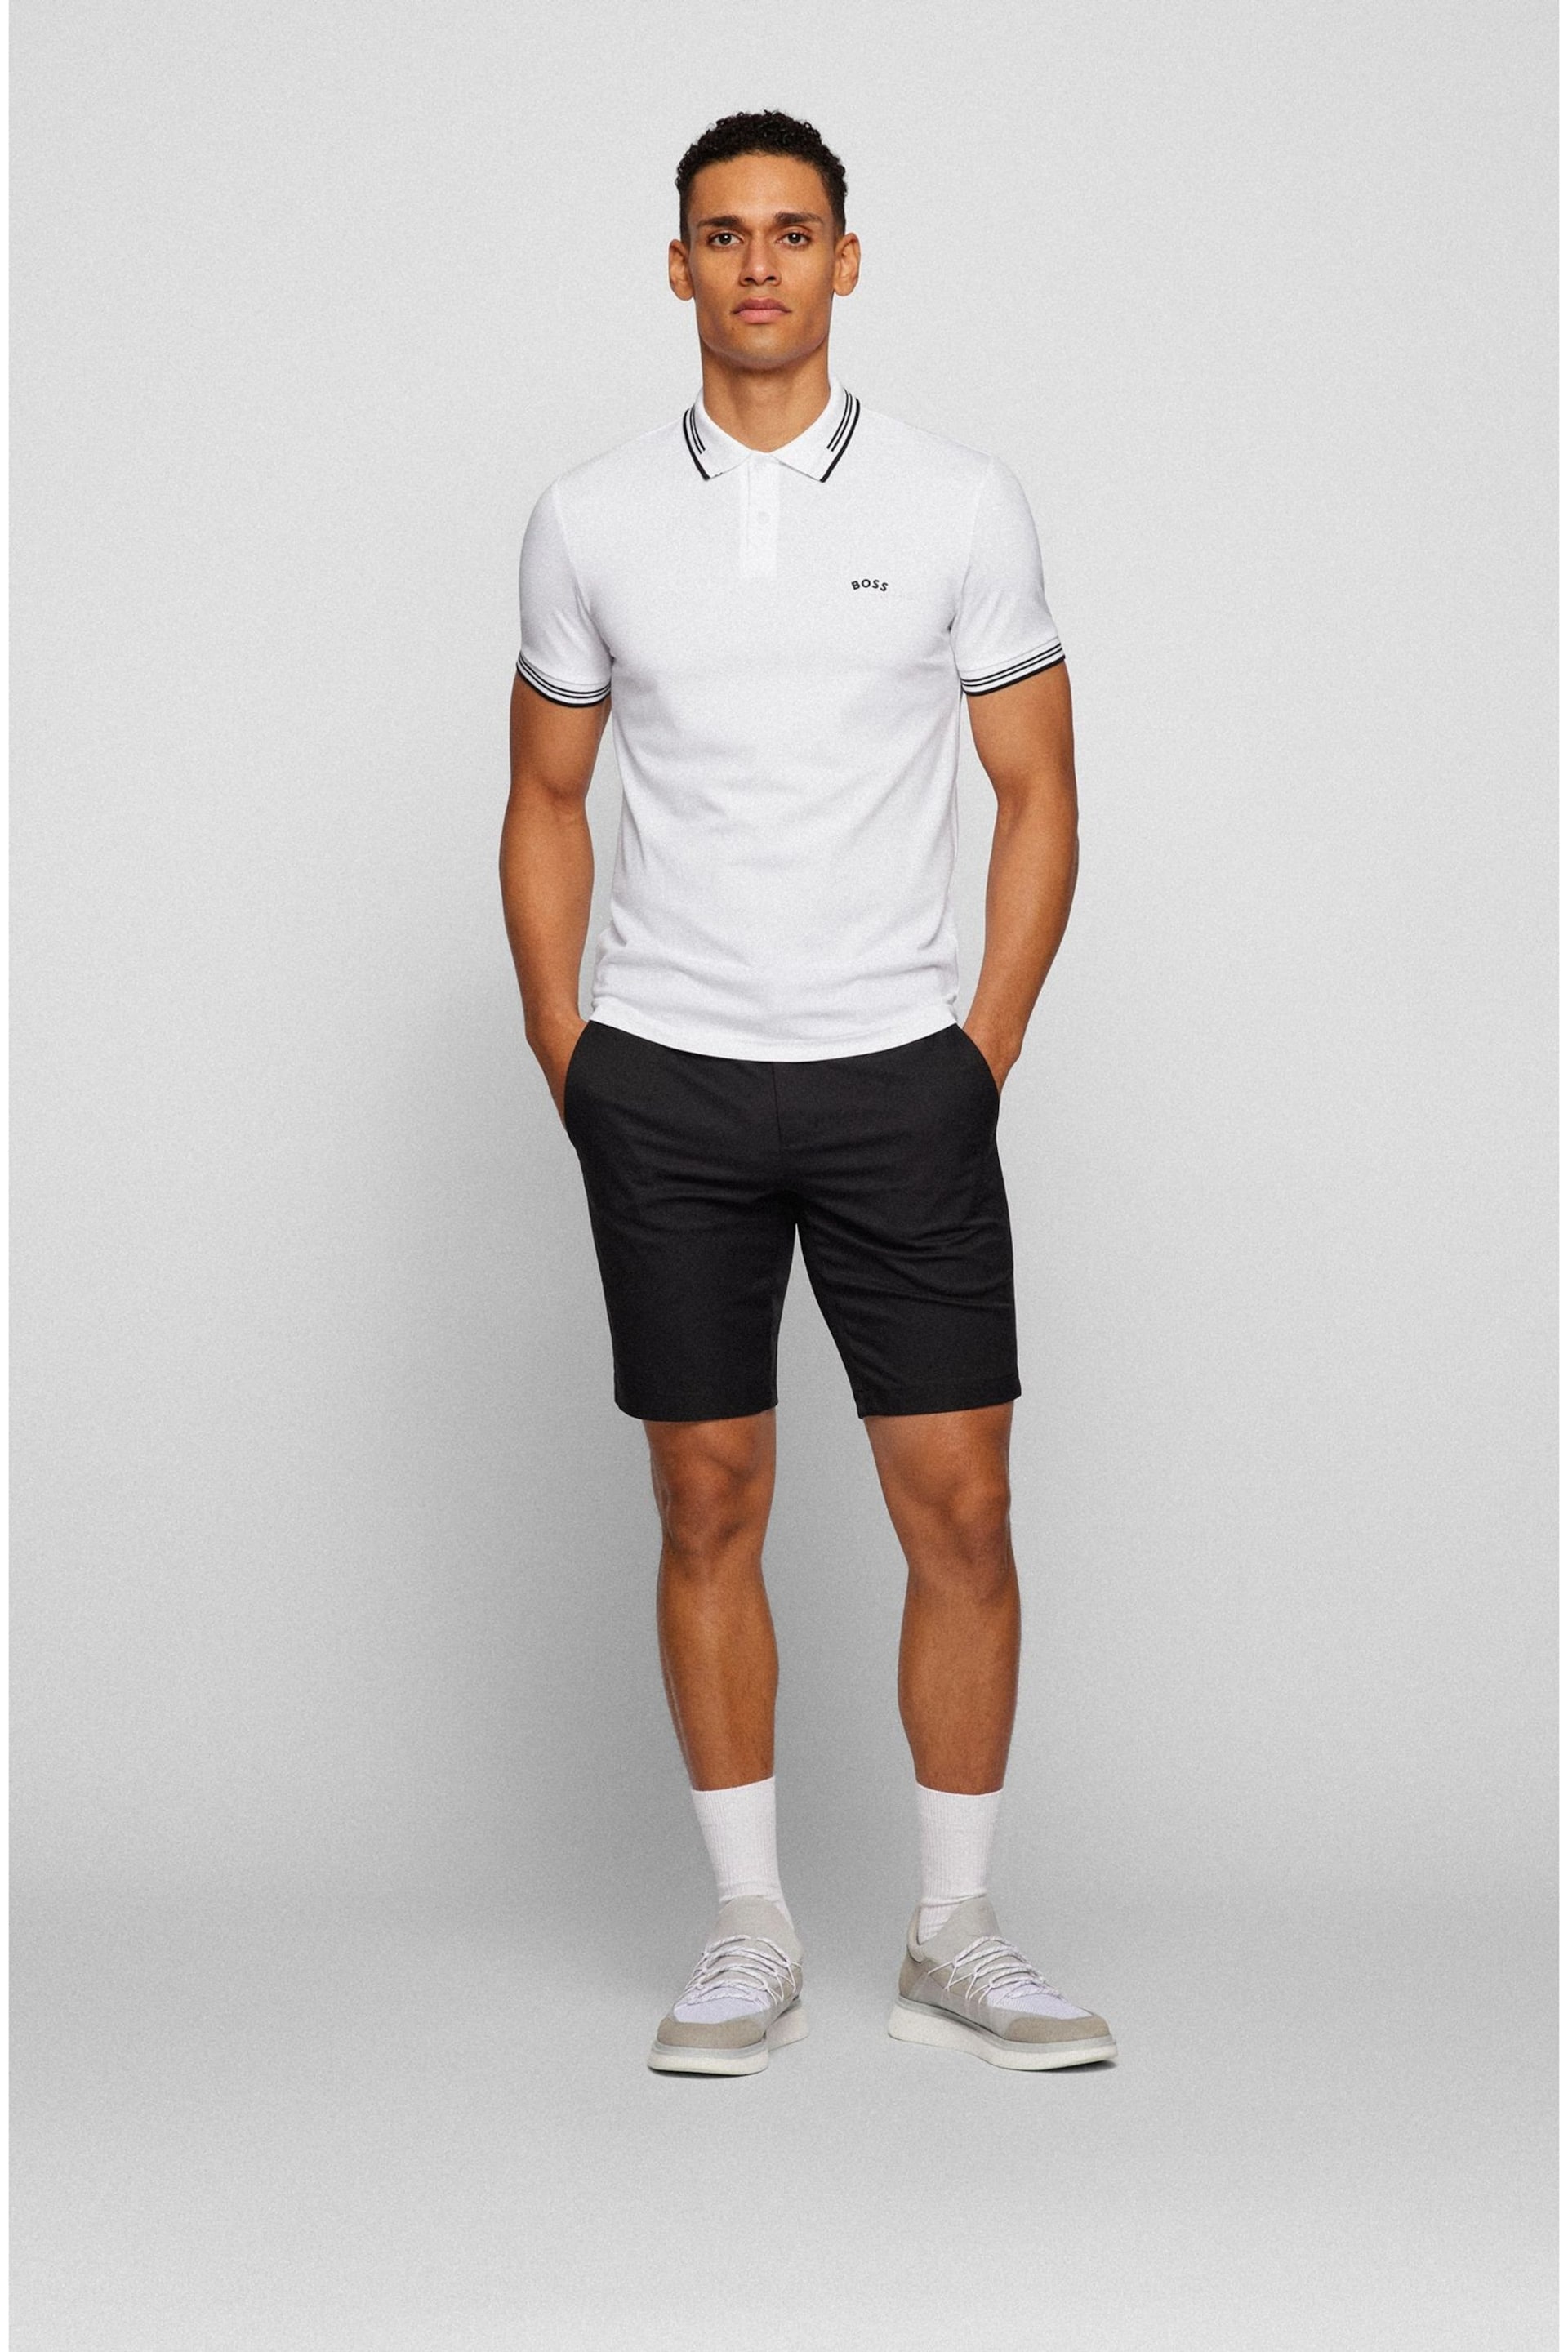 BOSS White Tipped Slim Fit Stretch Cotton Polo Shirt - Image 3 of 5